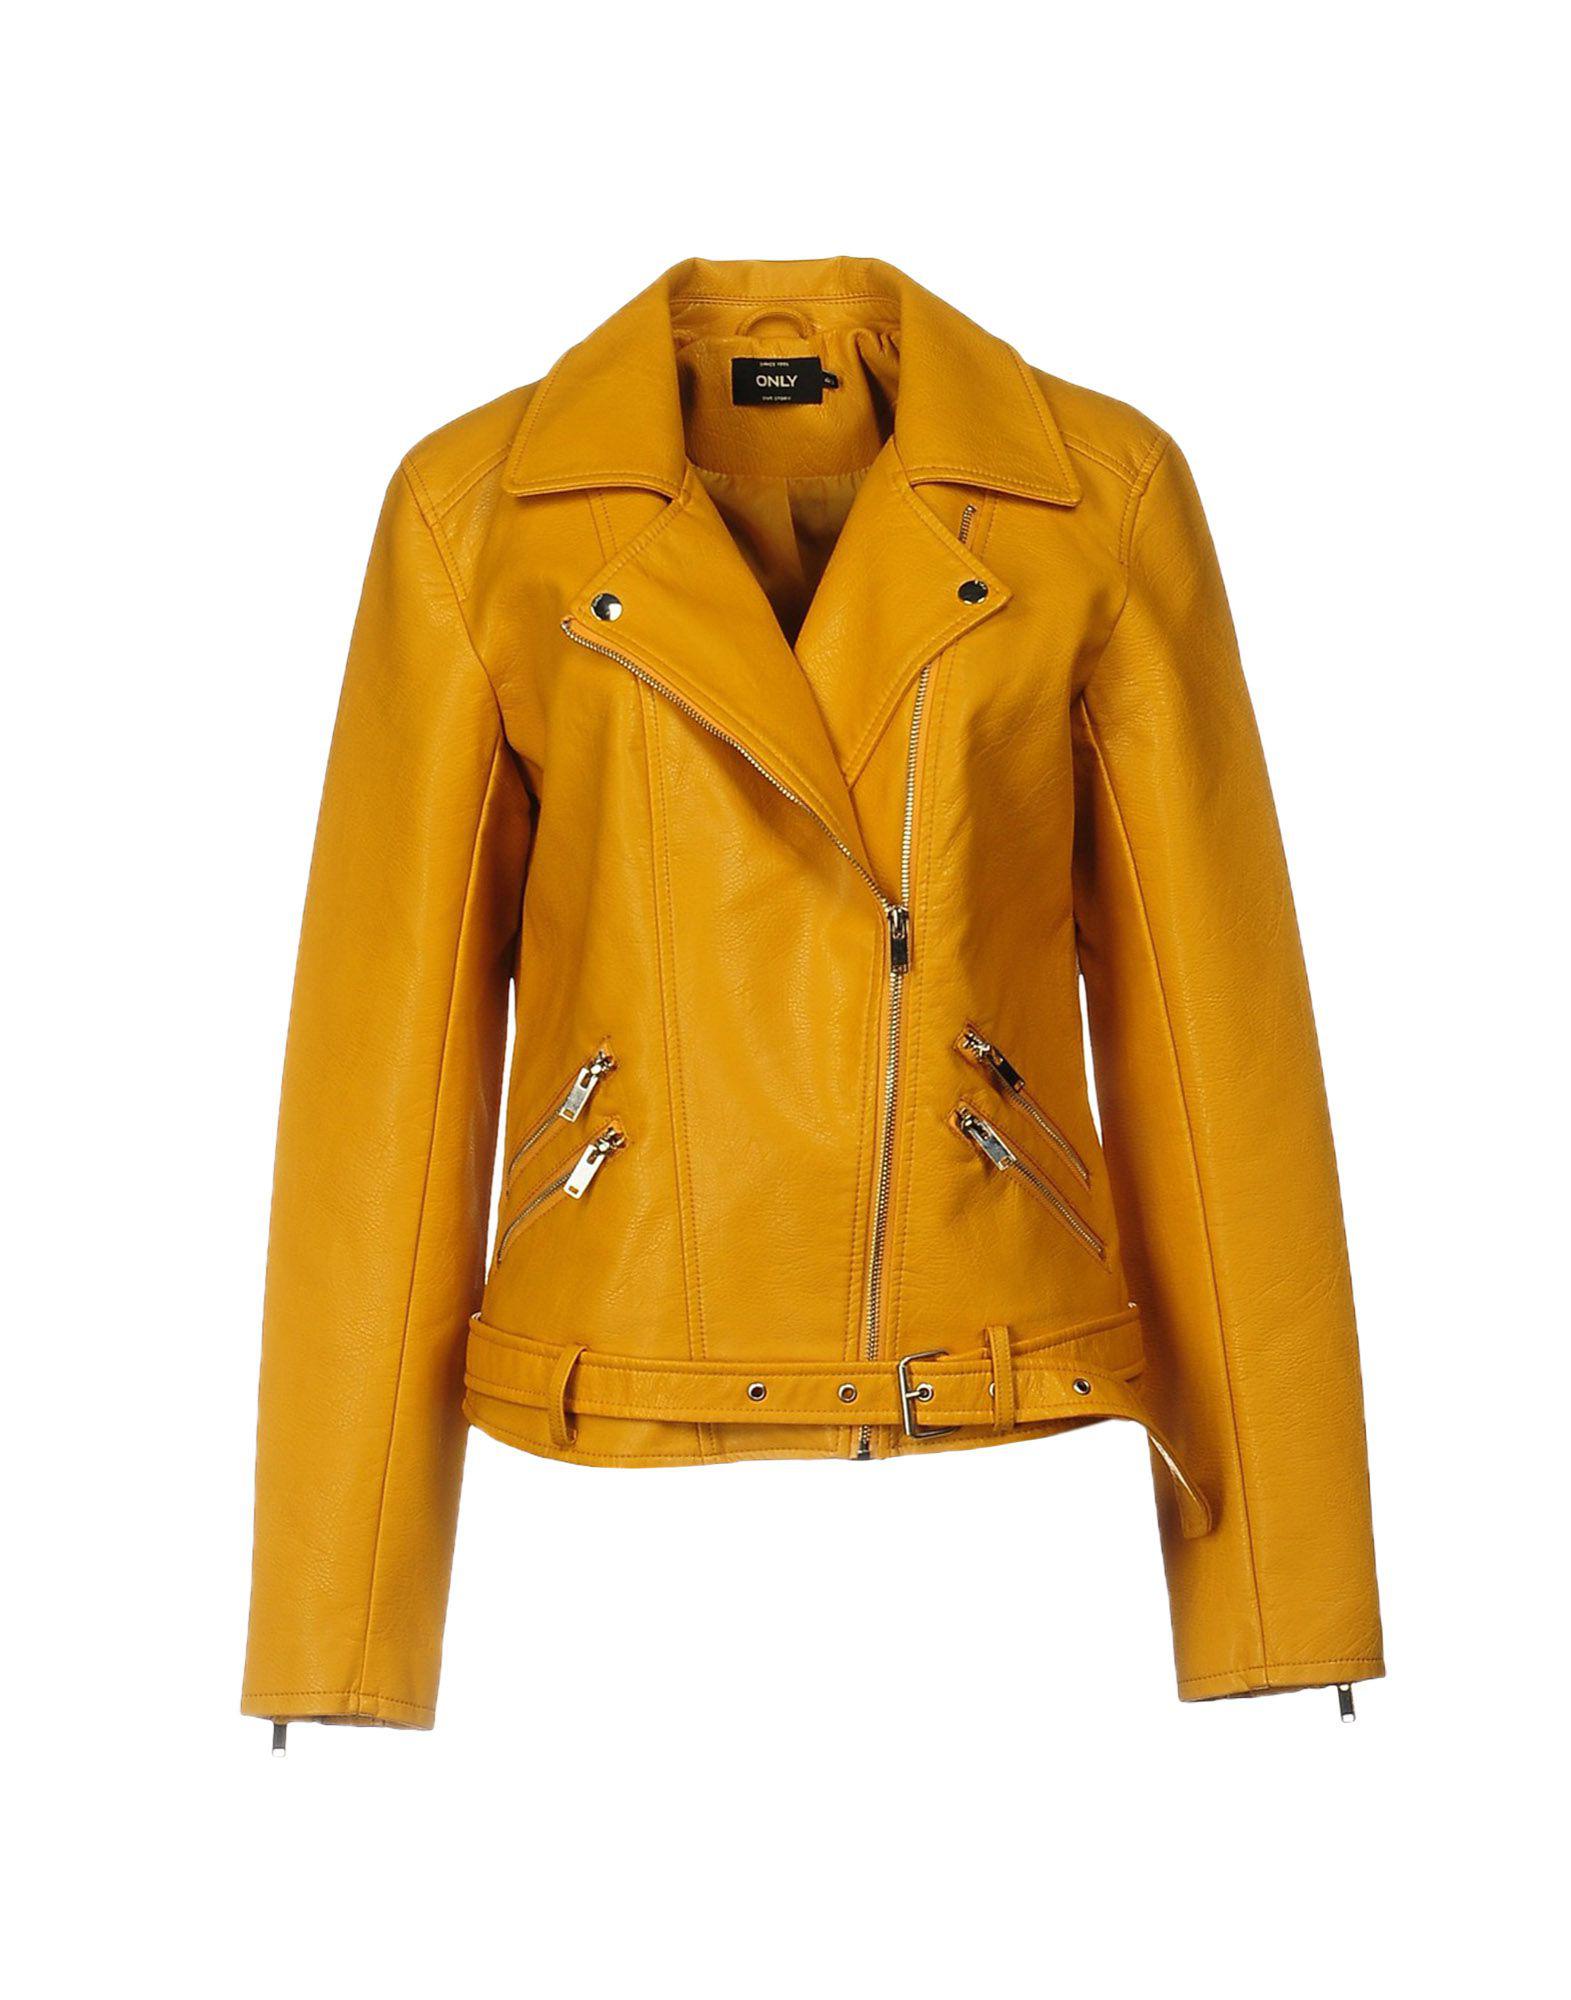 Lyst - Only Jacket in Yellow